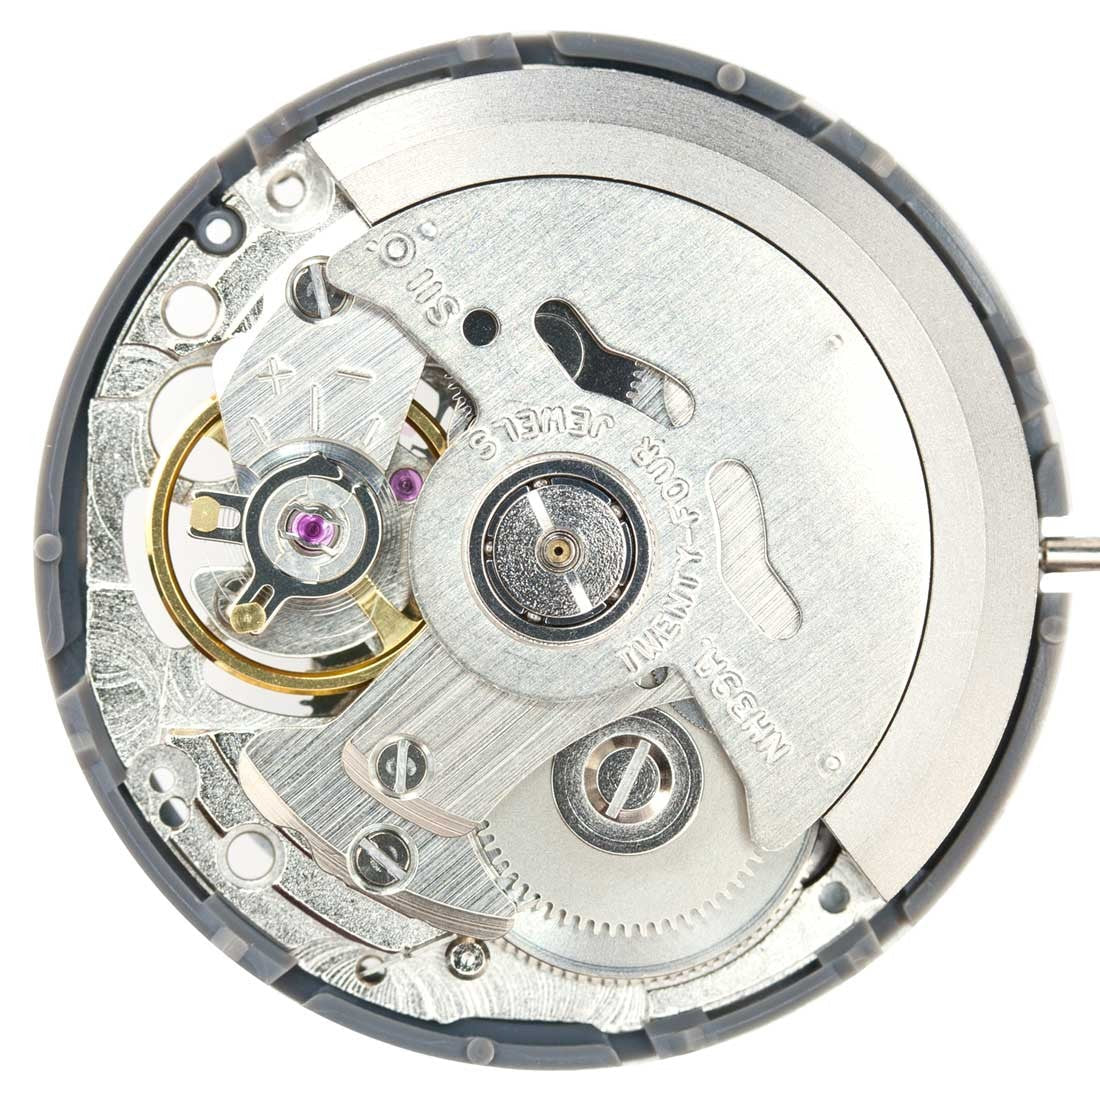 Seiko SII NH39A Japan Made Automatic Movement Ht. 7.98MM